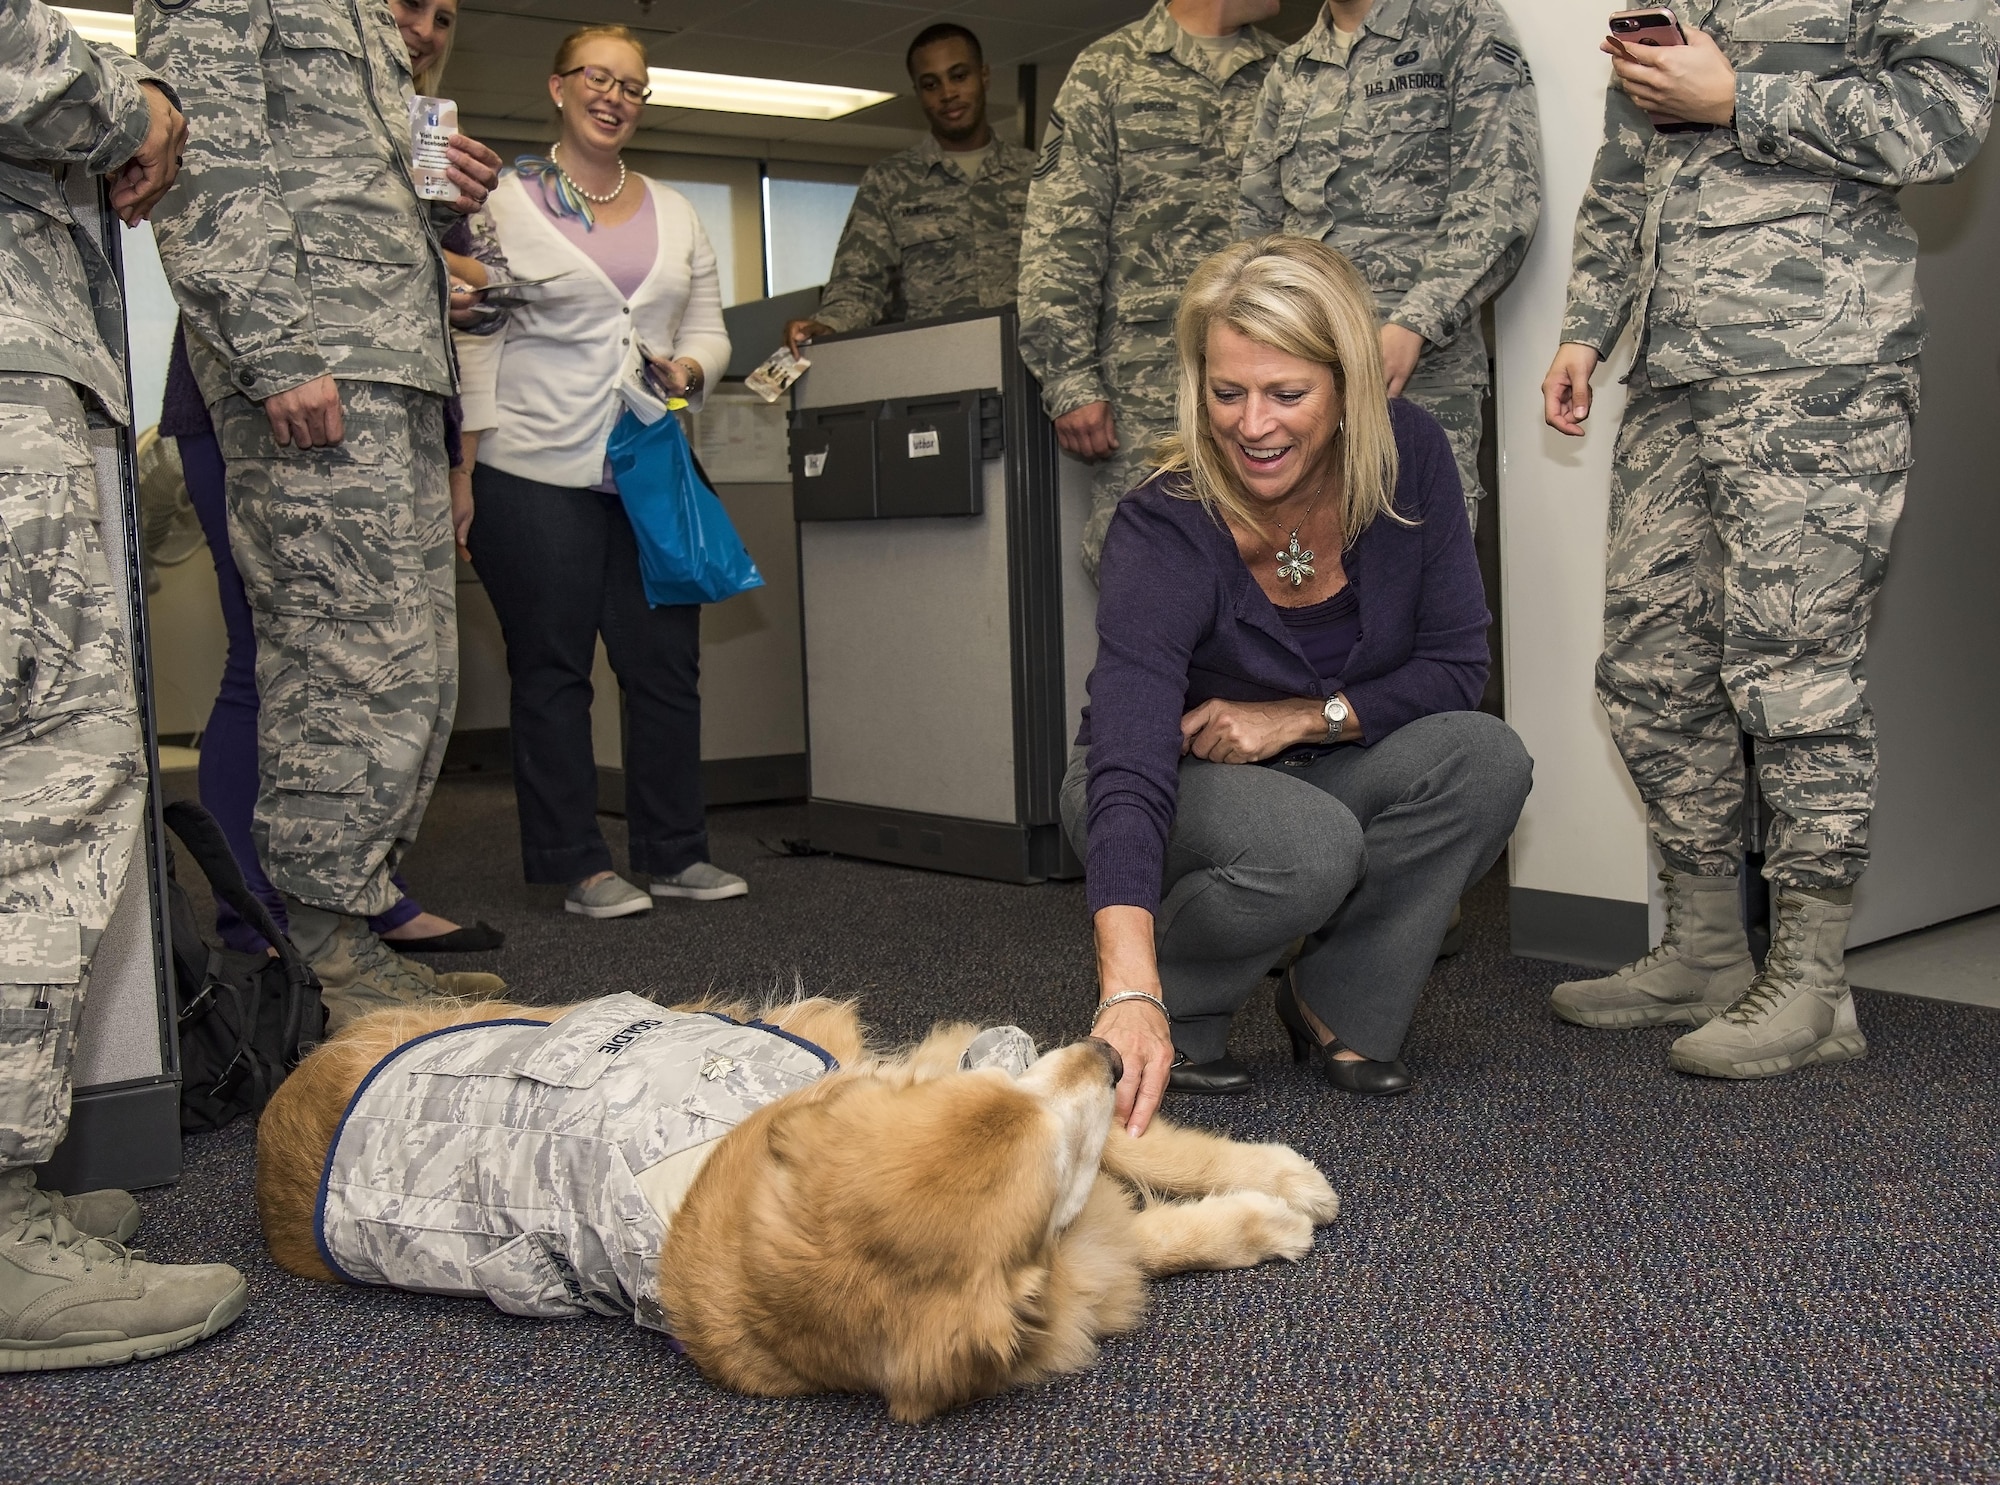 Laura Miller, 436th Comptroller Squadron financial analysis officer, pets Lt. Col. Goldie as he visits Team Dover personnel during Domestic Violence Awareness Month, Oct.19, 2017, on Dover Air Force Base, Del. Goldie is a nine-year-old Golden Retriever therapy dog stationed at Walter Reed National Military Medical Center, Bethesda, Md. (U.S. Air Force photo by Roland Balik)